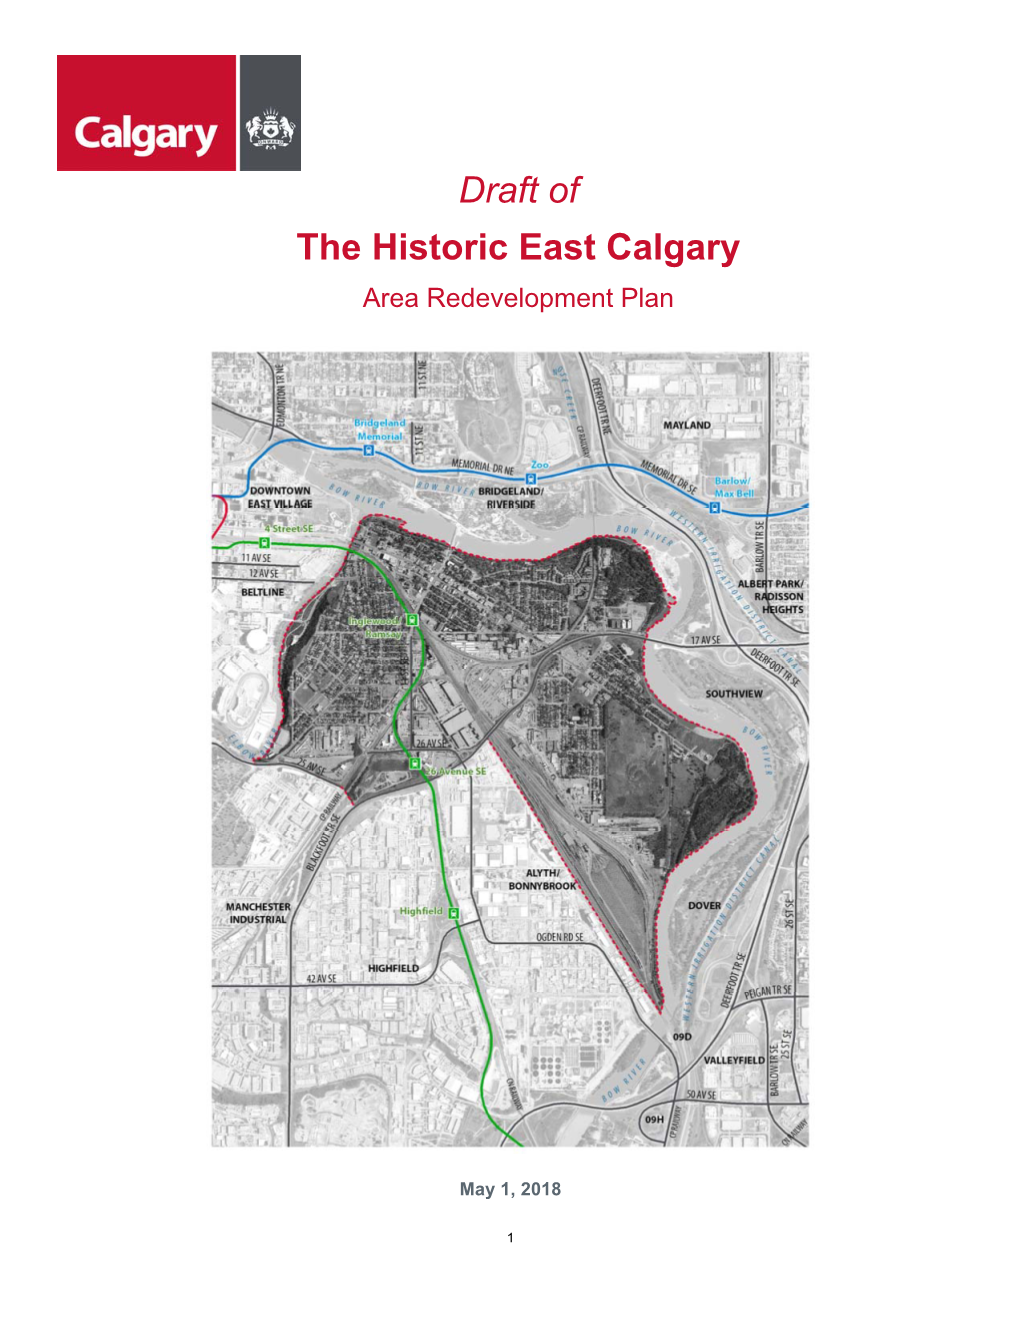 Draft of the Historic East Calgary Area Redevelopment Plan